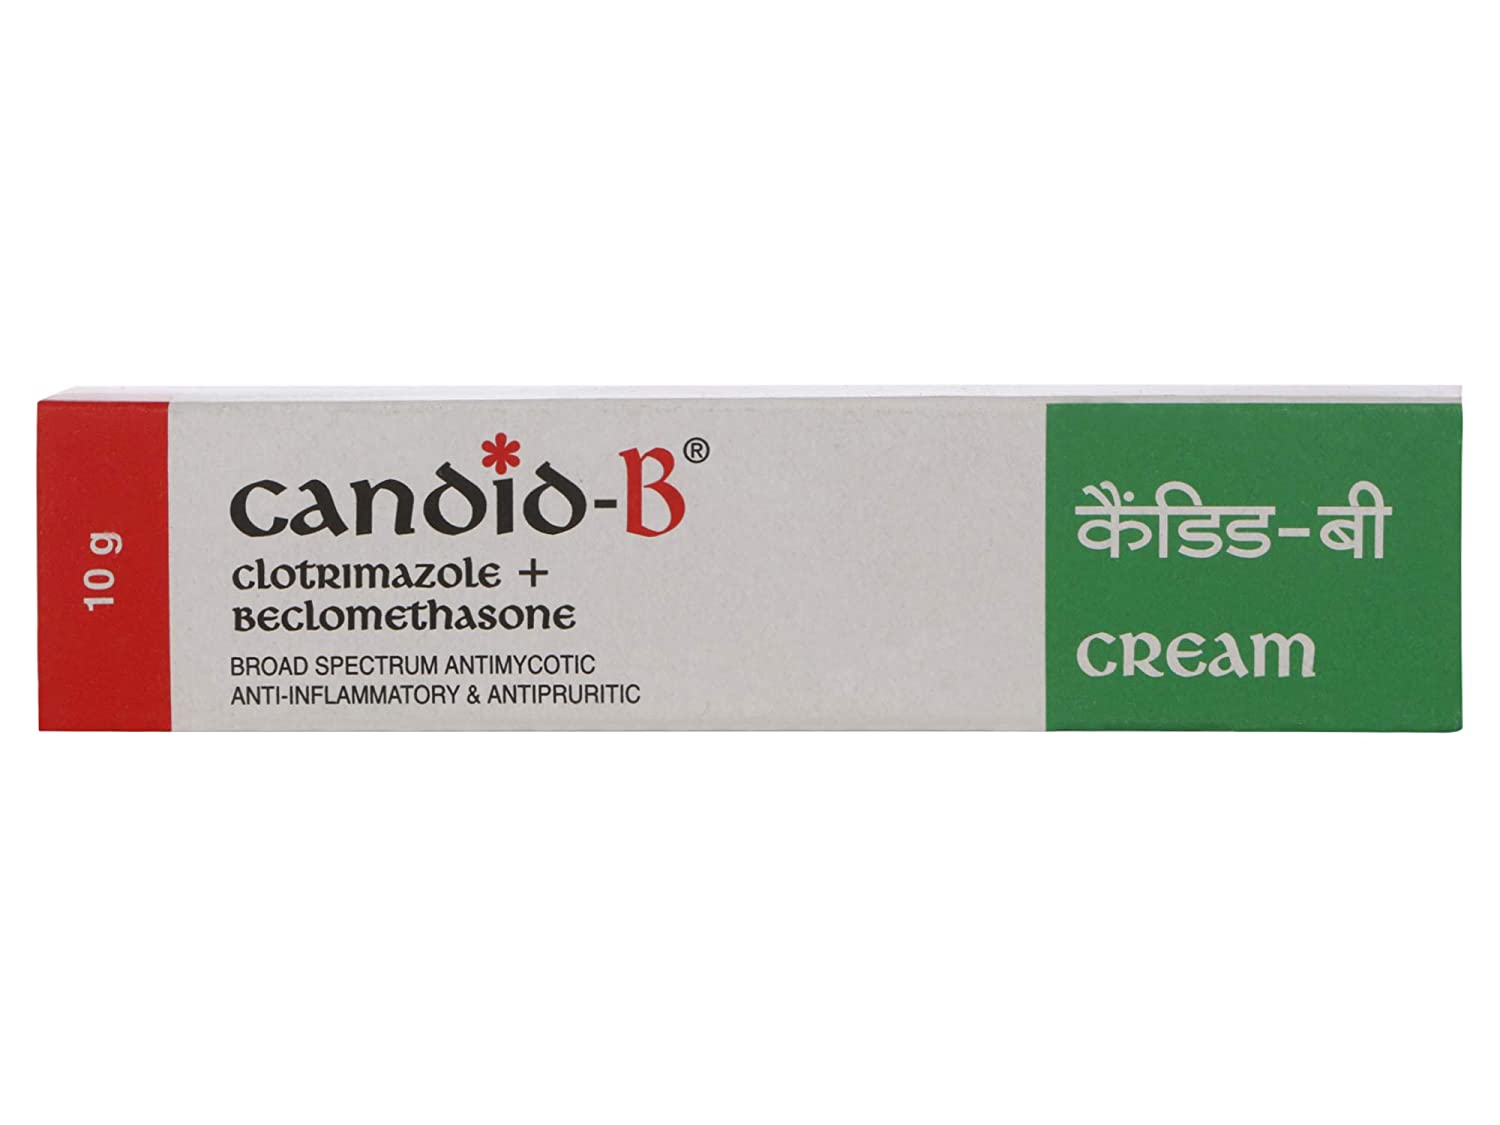 Candid B Cream 20 gm | Beclometasone Topical with Clotrimazole Topical